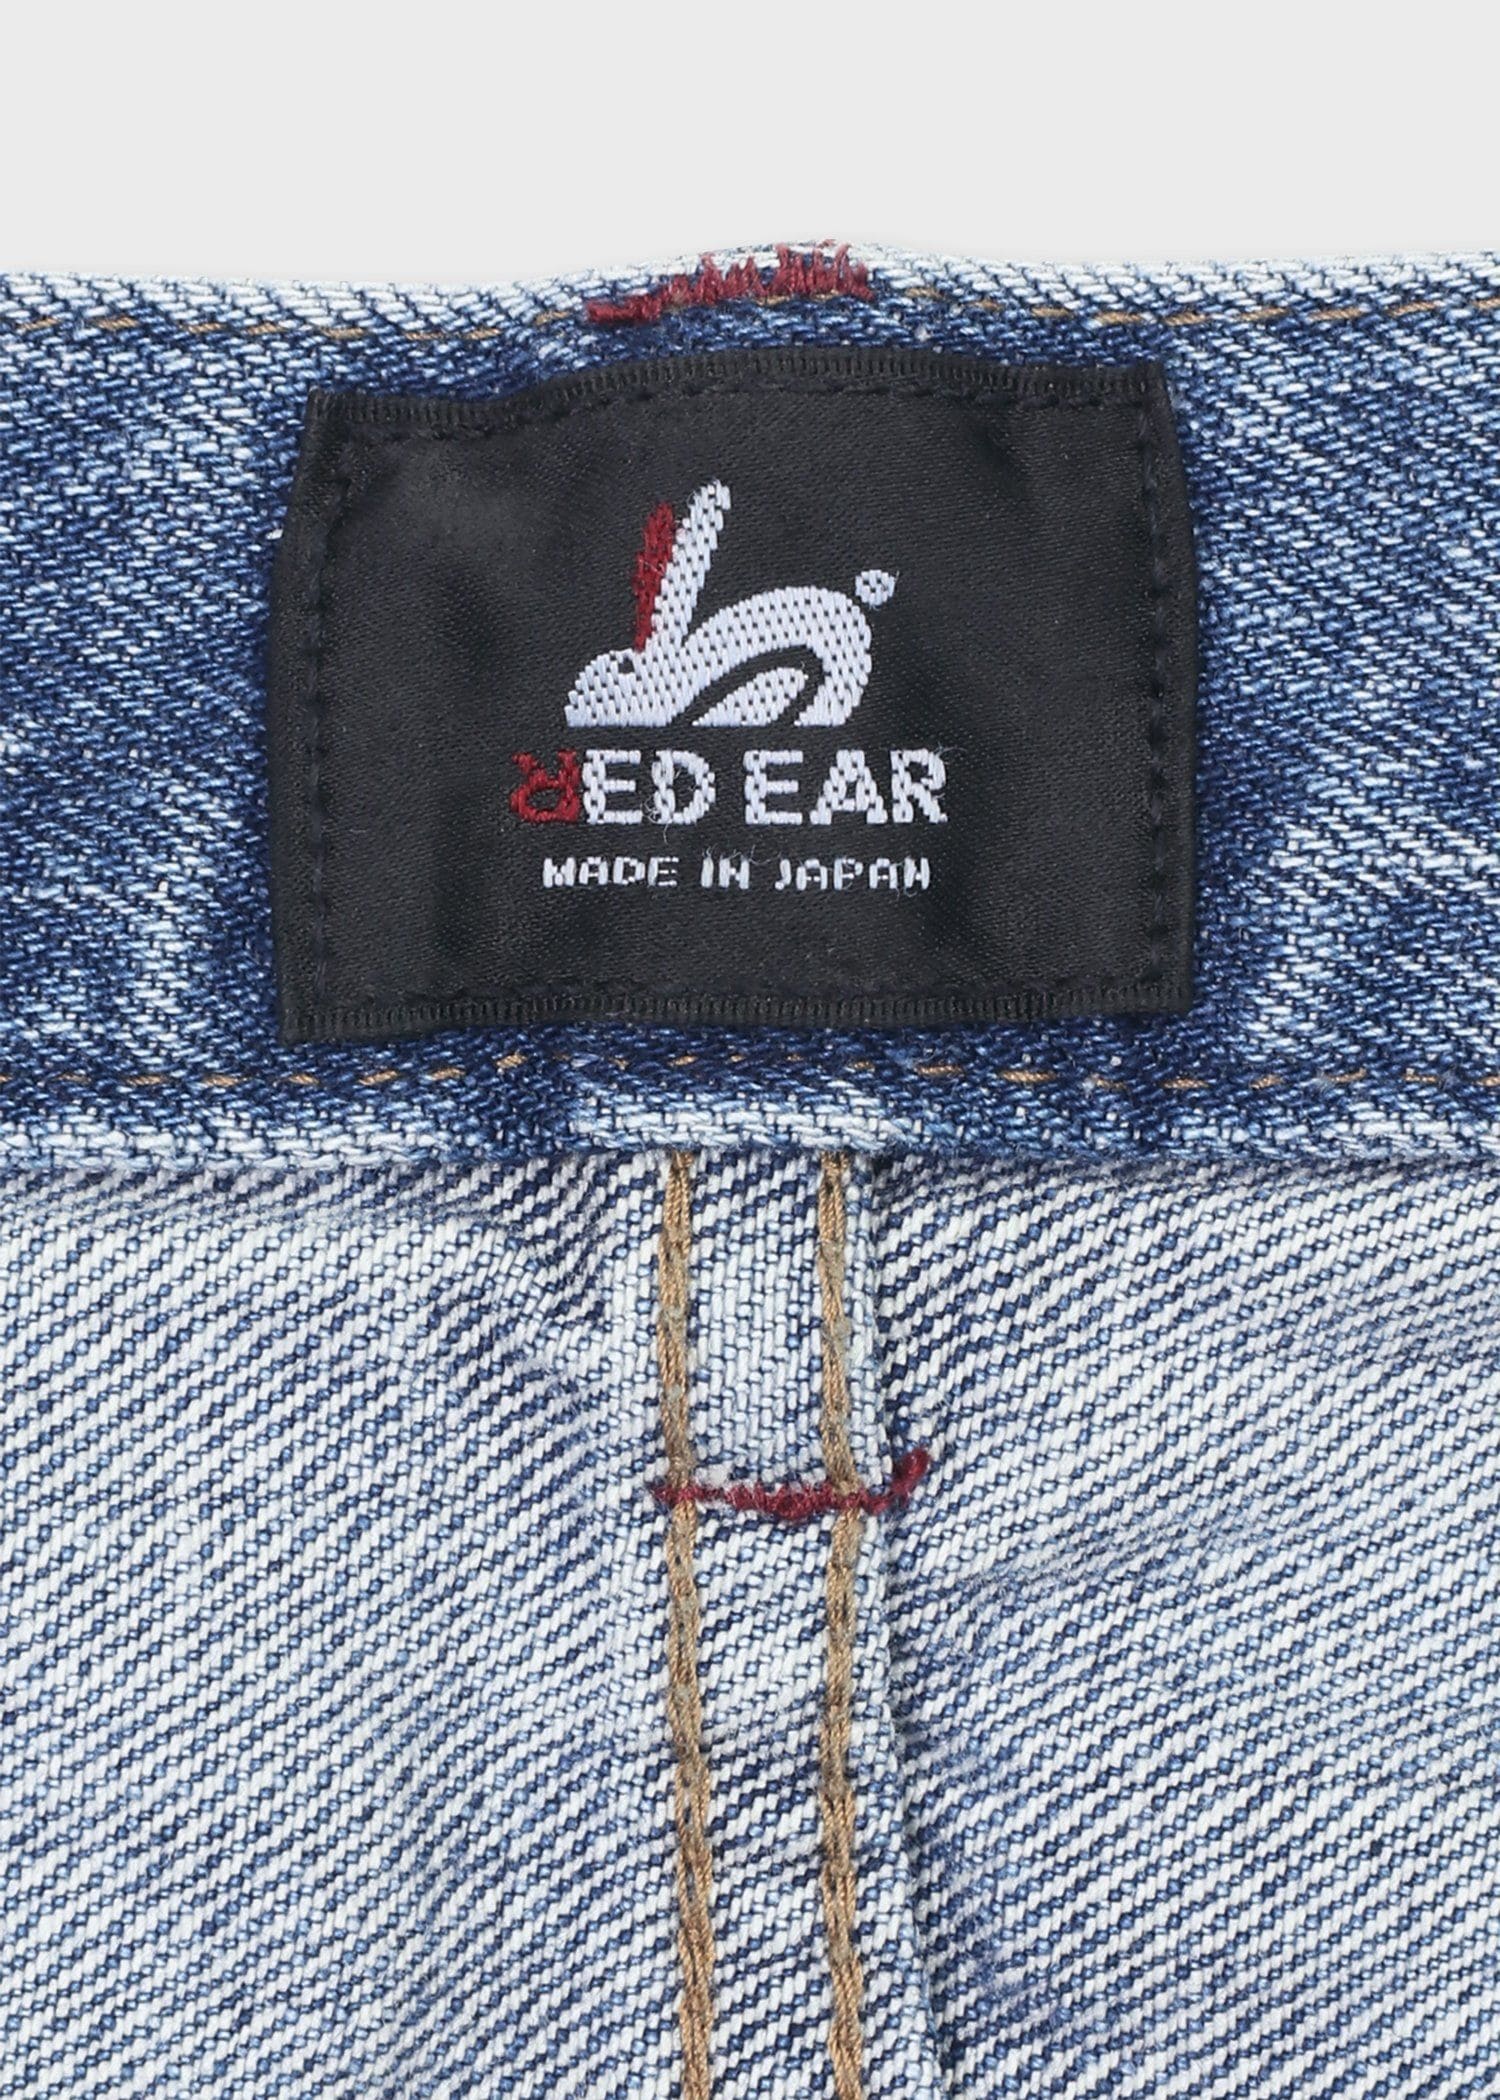 RED EAR ヴィンテージリペア ジーンズ